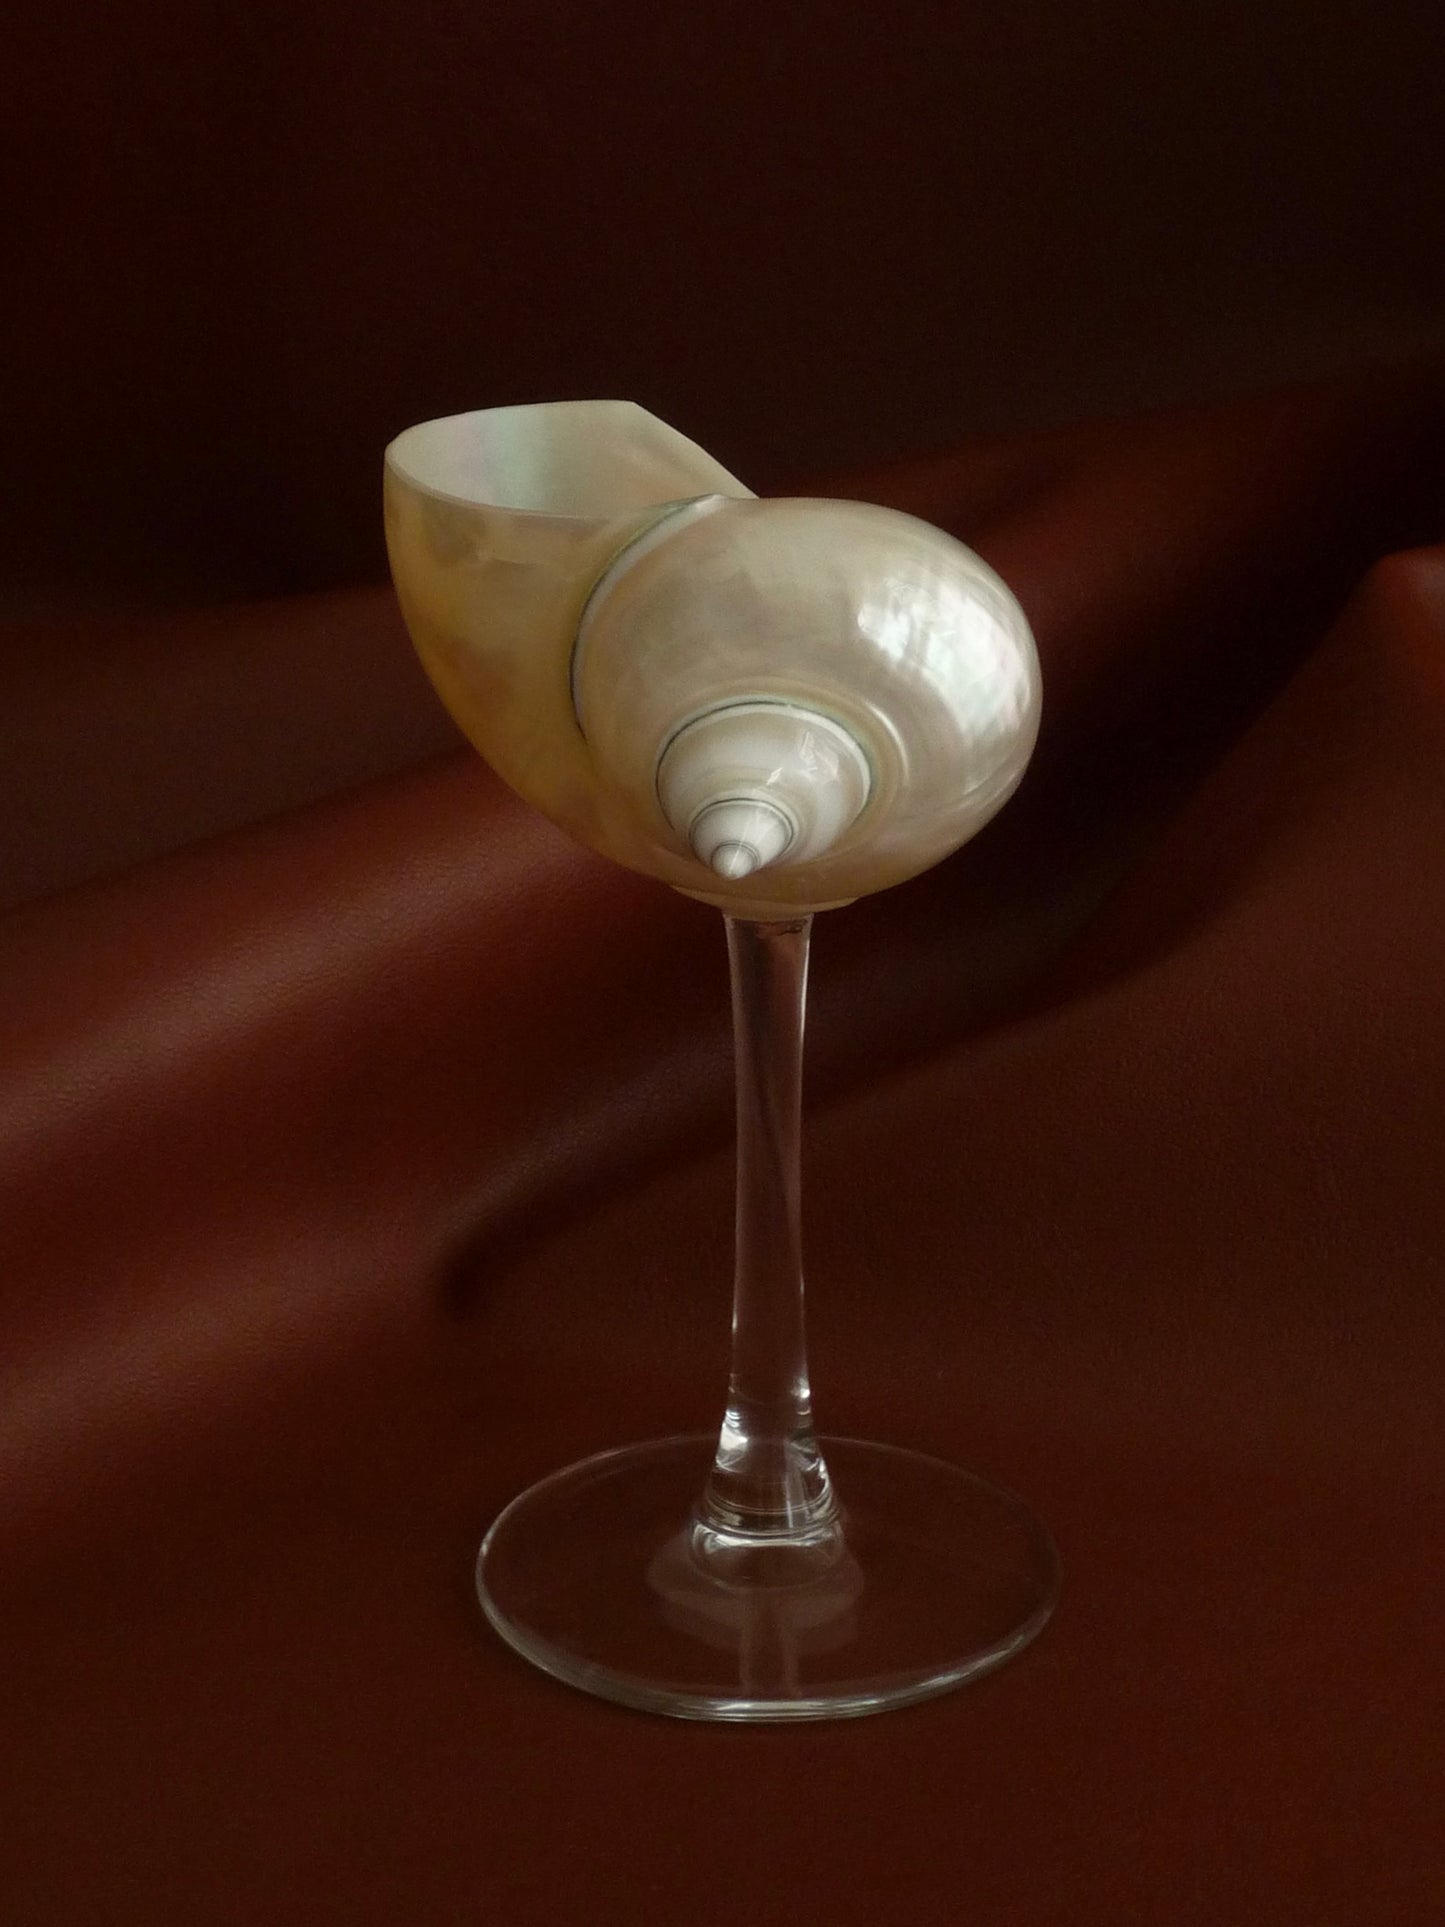 Сurly shell glass with glass stem